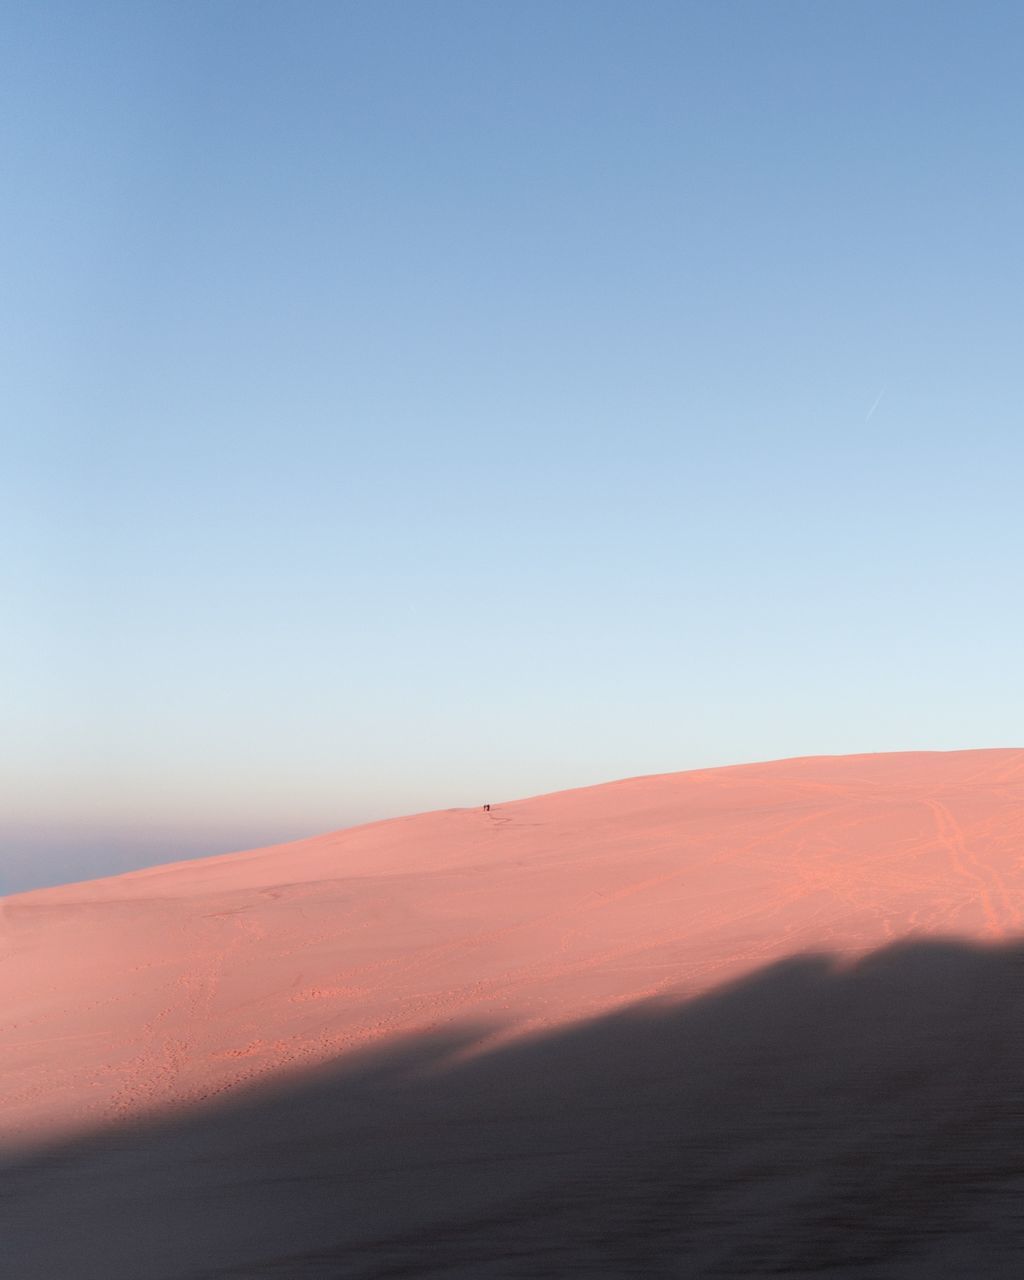 SCENIC VIEW OF DESERT AGAINST CLEAR SKY AT SUNSET